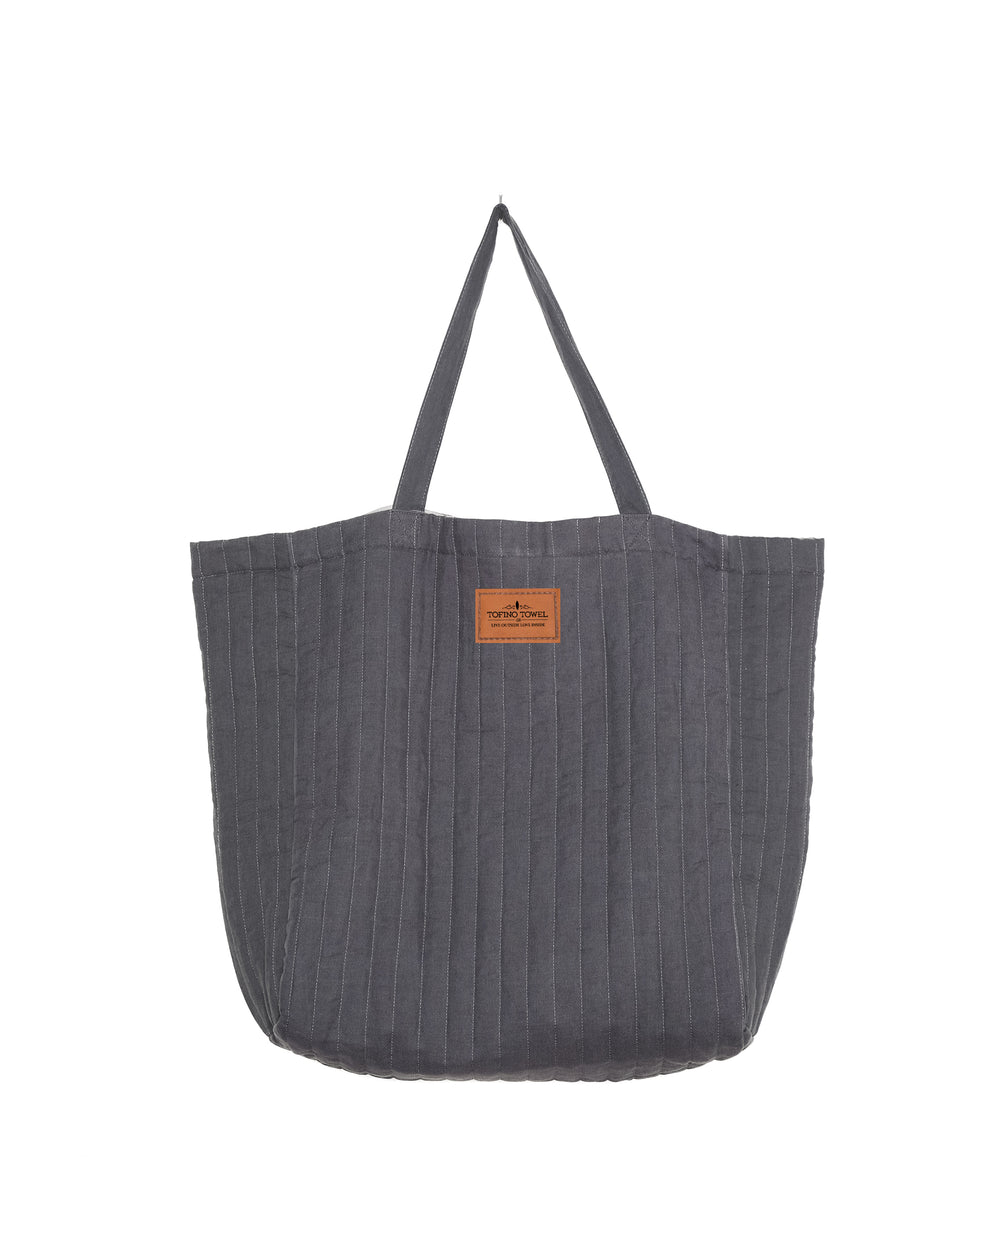 Charcoal ESME oversized quilted tote - photographed on a white background with tan label of Tofino Towel